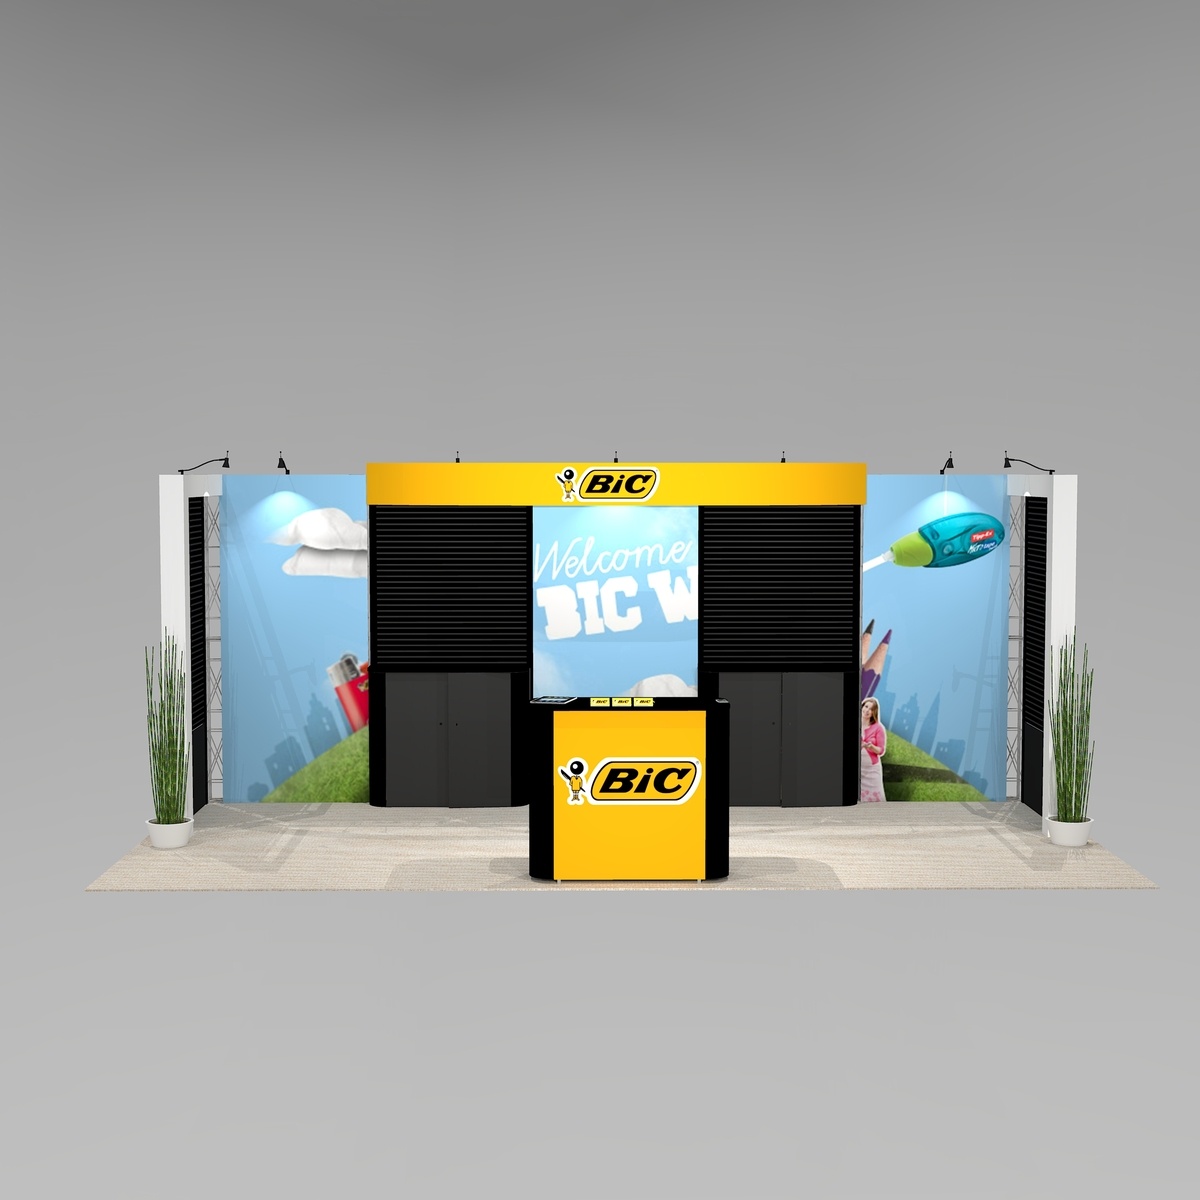 Giant Mural trade show exhibit design SHA1020 Graphic Package A